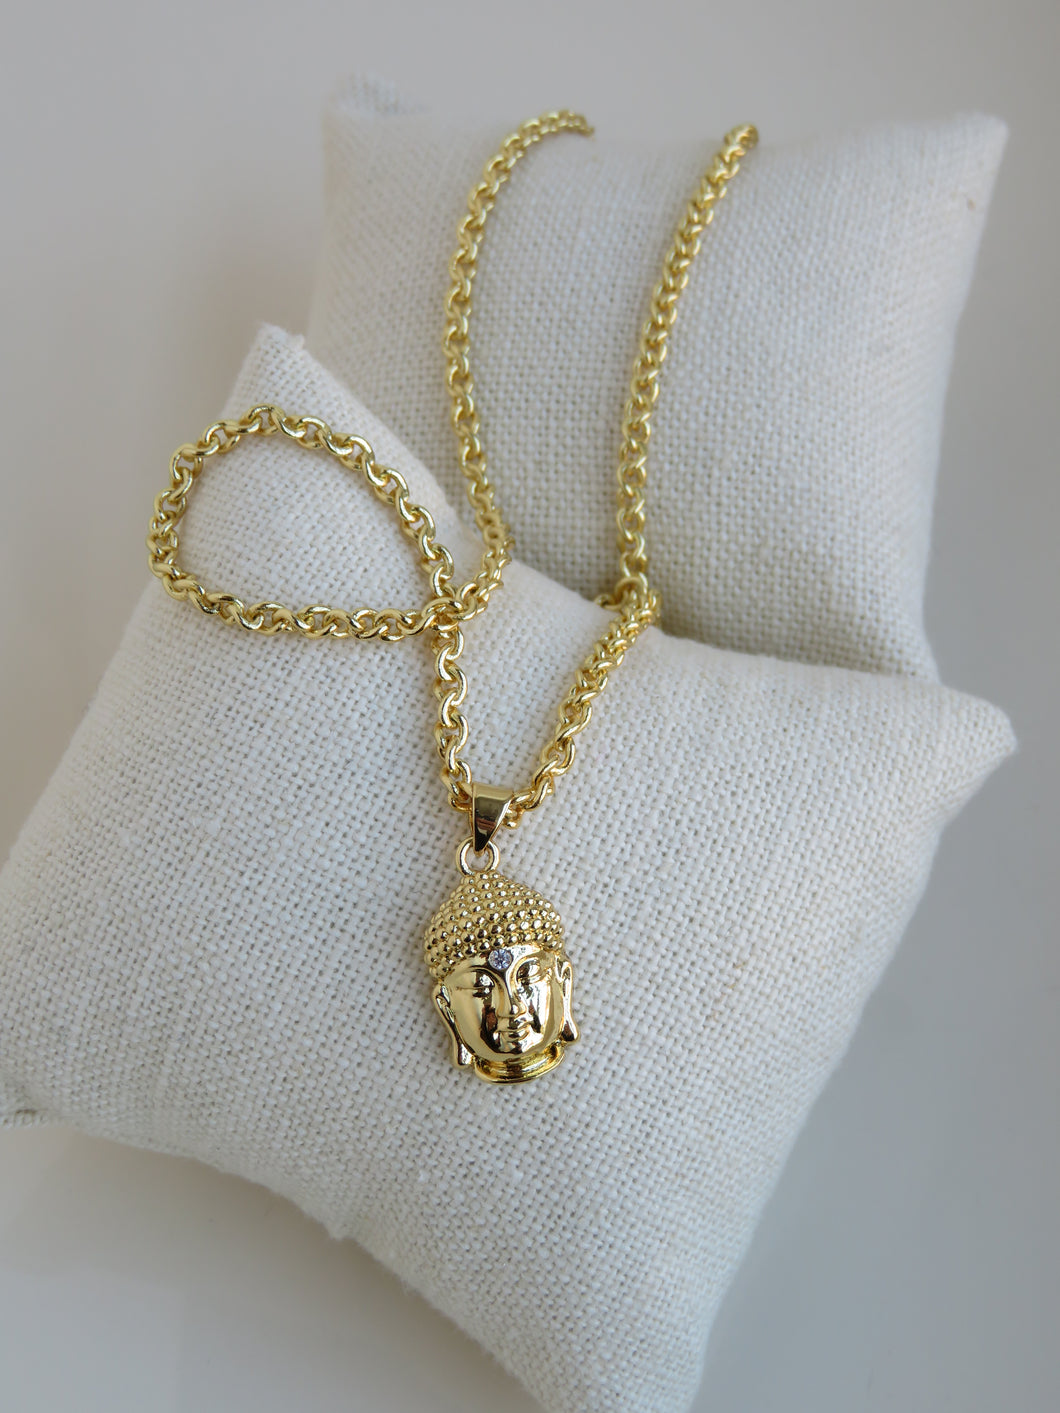 Golden Buddha Necklace - Cable Link